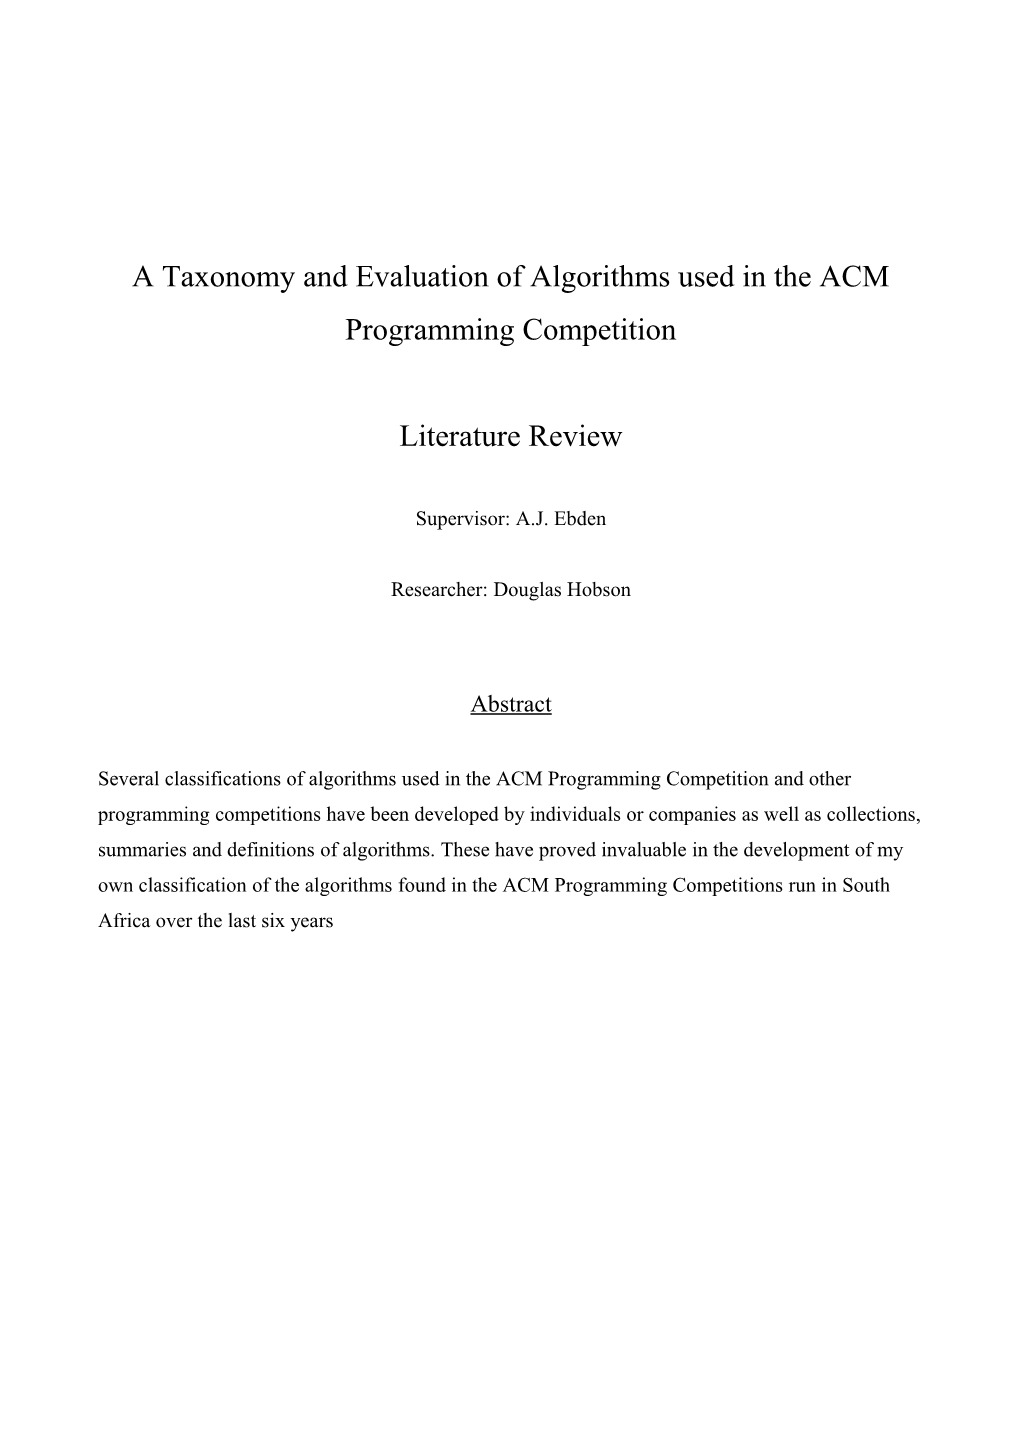 A Taxonomy of Algorithms Used in the ACM Programming Competition